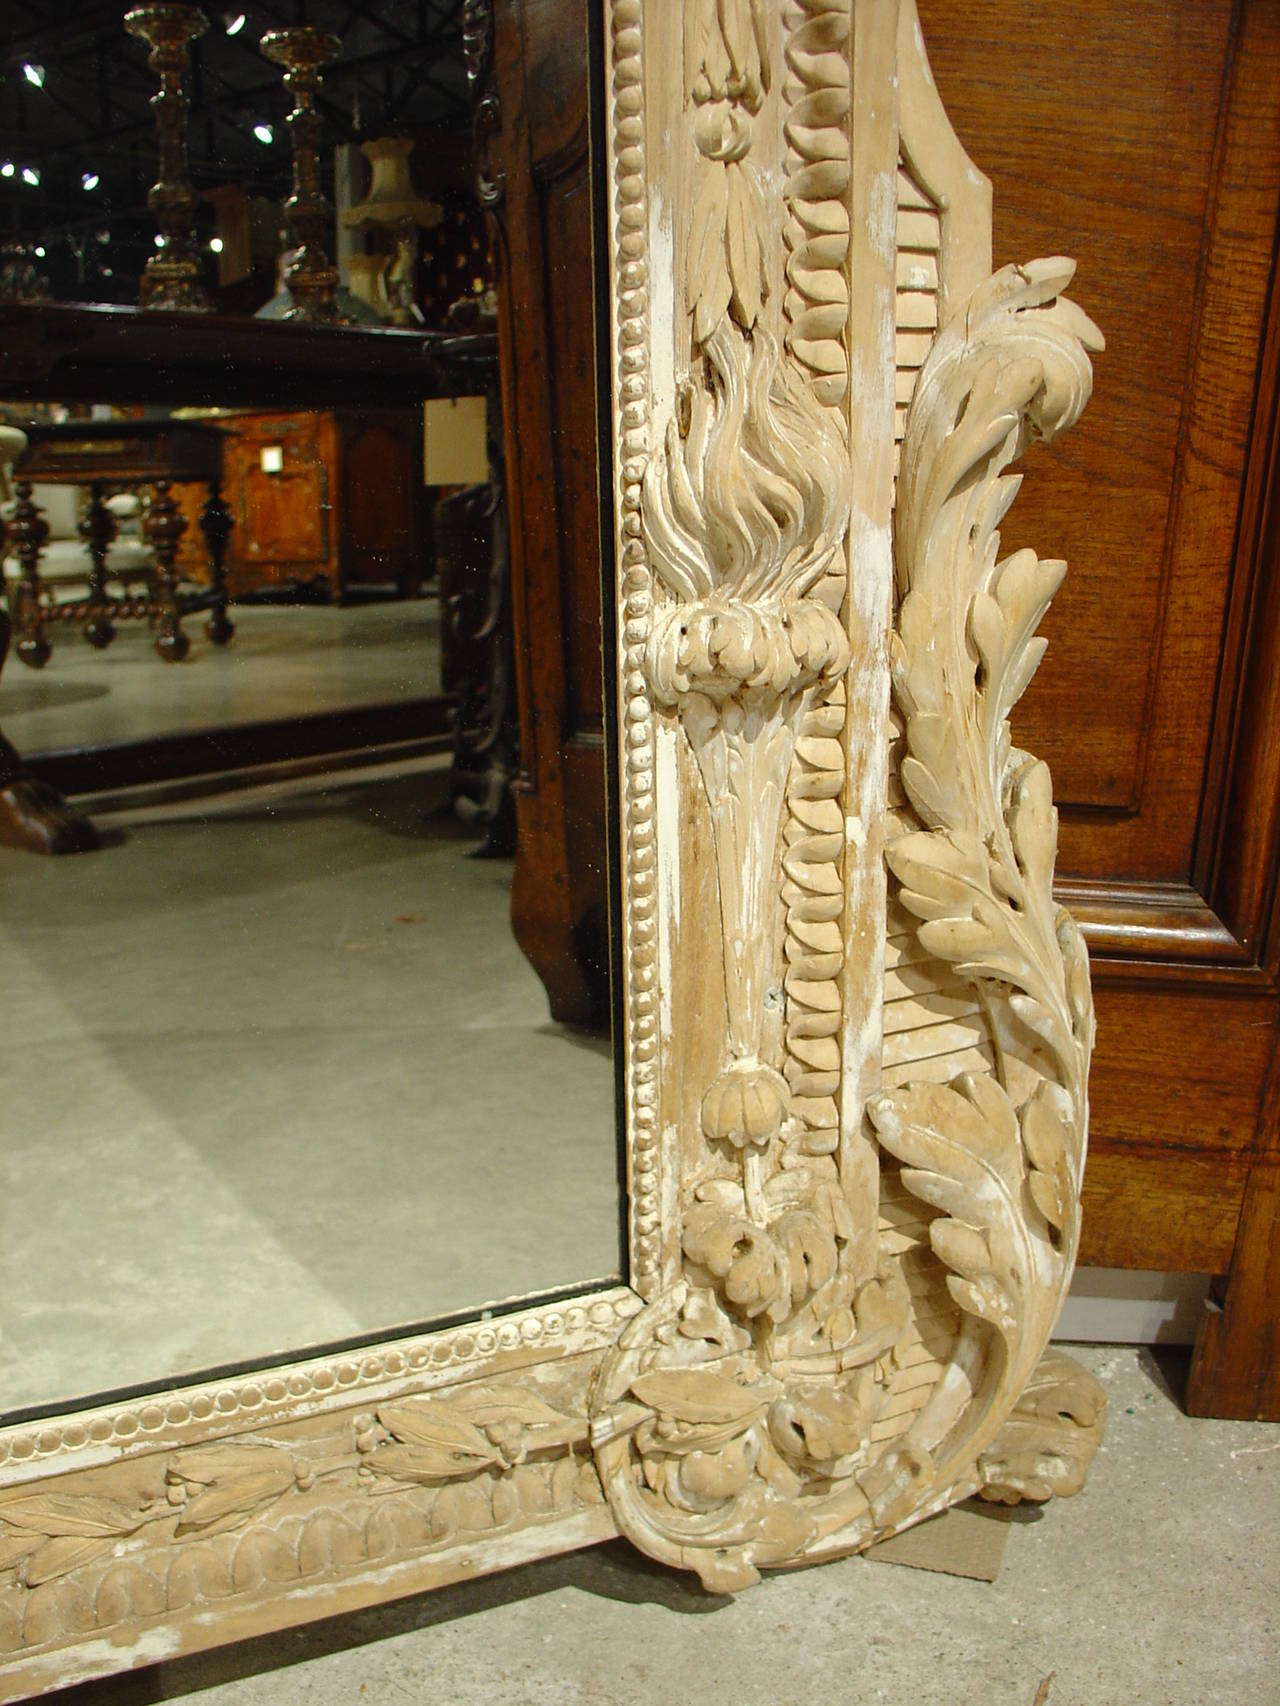 The hand carving on this French mirror is absolutely stunning. From the tiniest flower to the large relief of the flowers in the garlands, the details and proportions blend beautifully. The old parcel paint finish is typical of years of wear to the